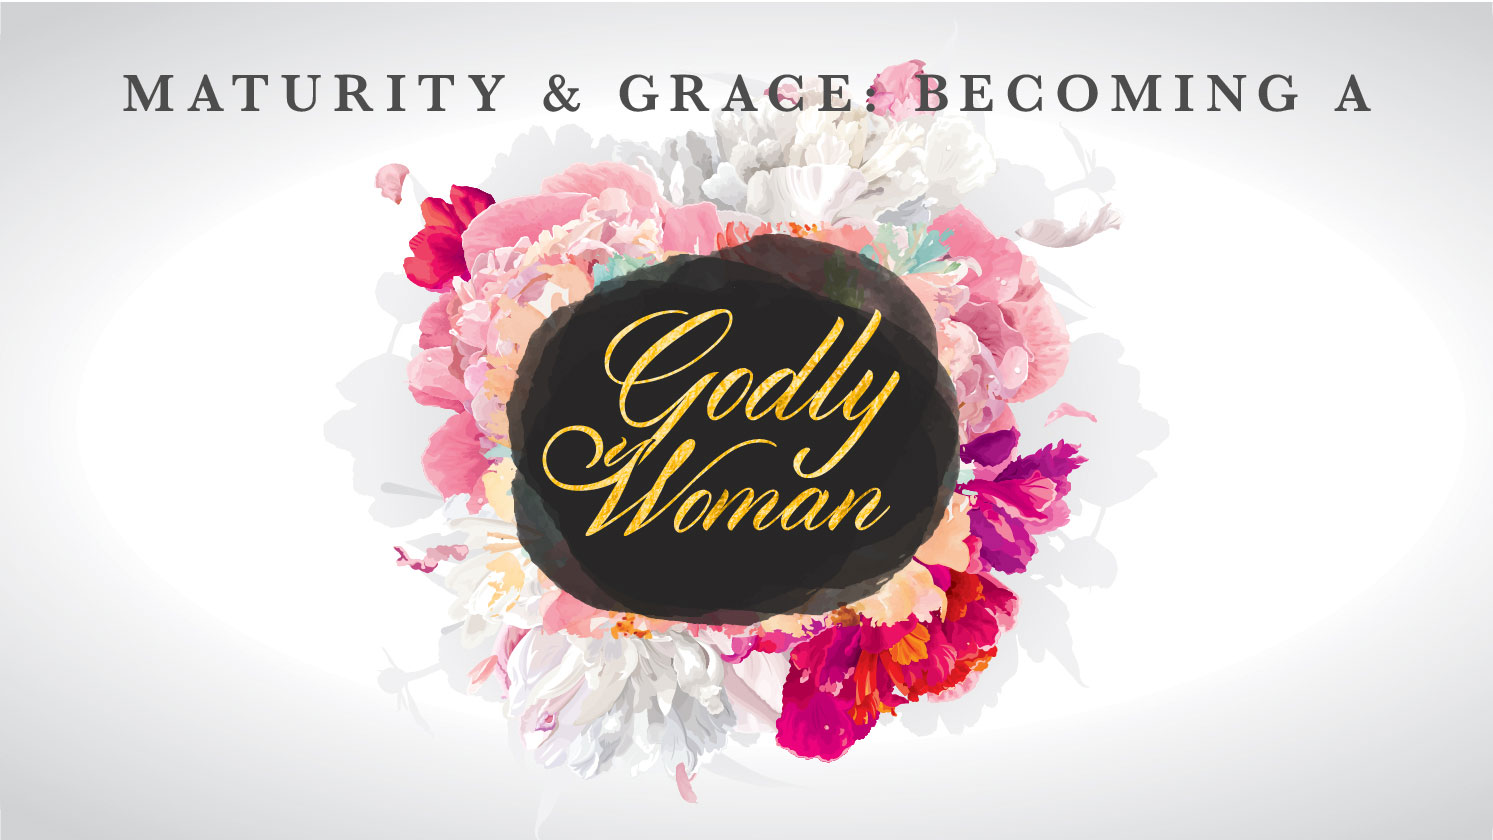 Maturity and Grace: Becoming a Godly Woman